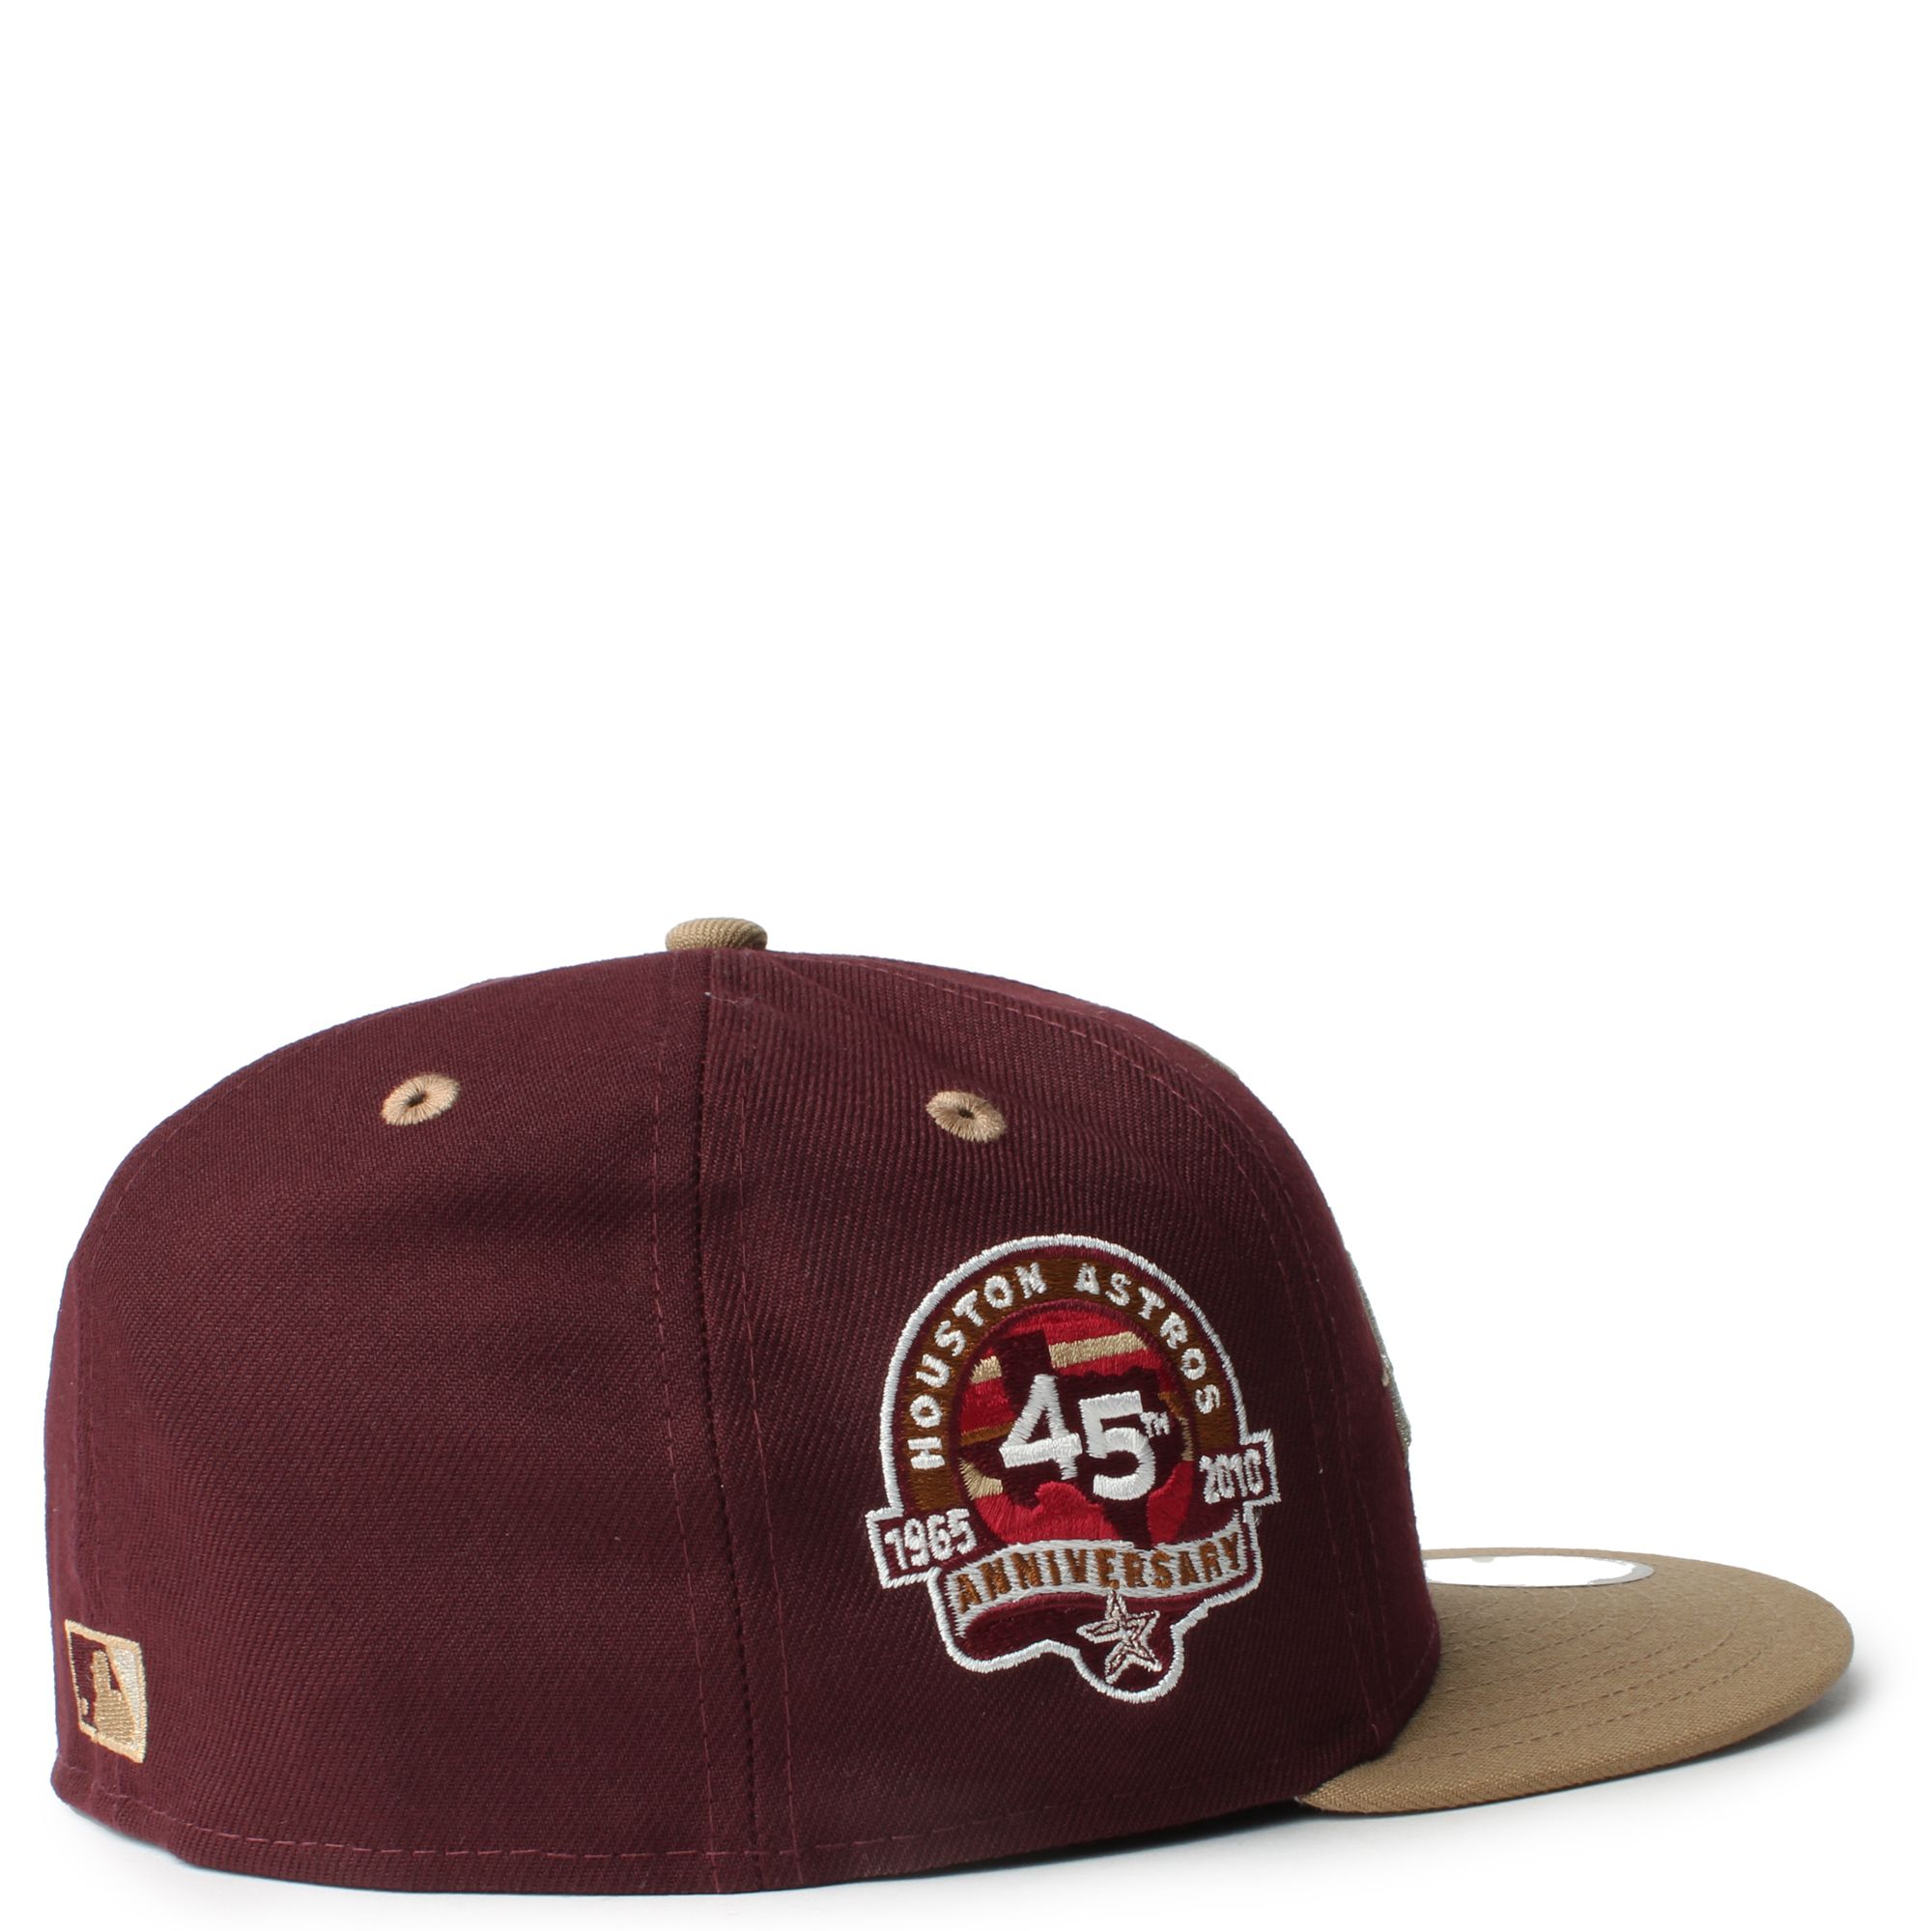 New Era Caps Houston Astros Maroon 59FIFTY Fitted Hat Maroon